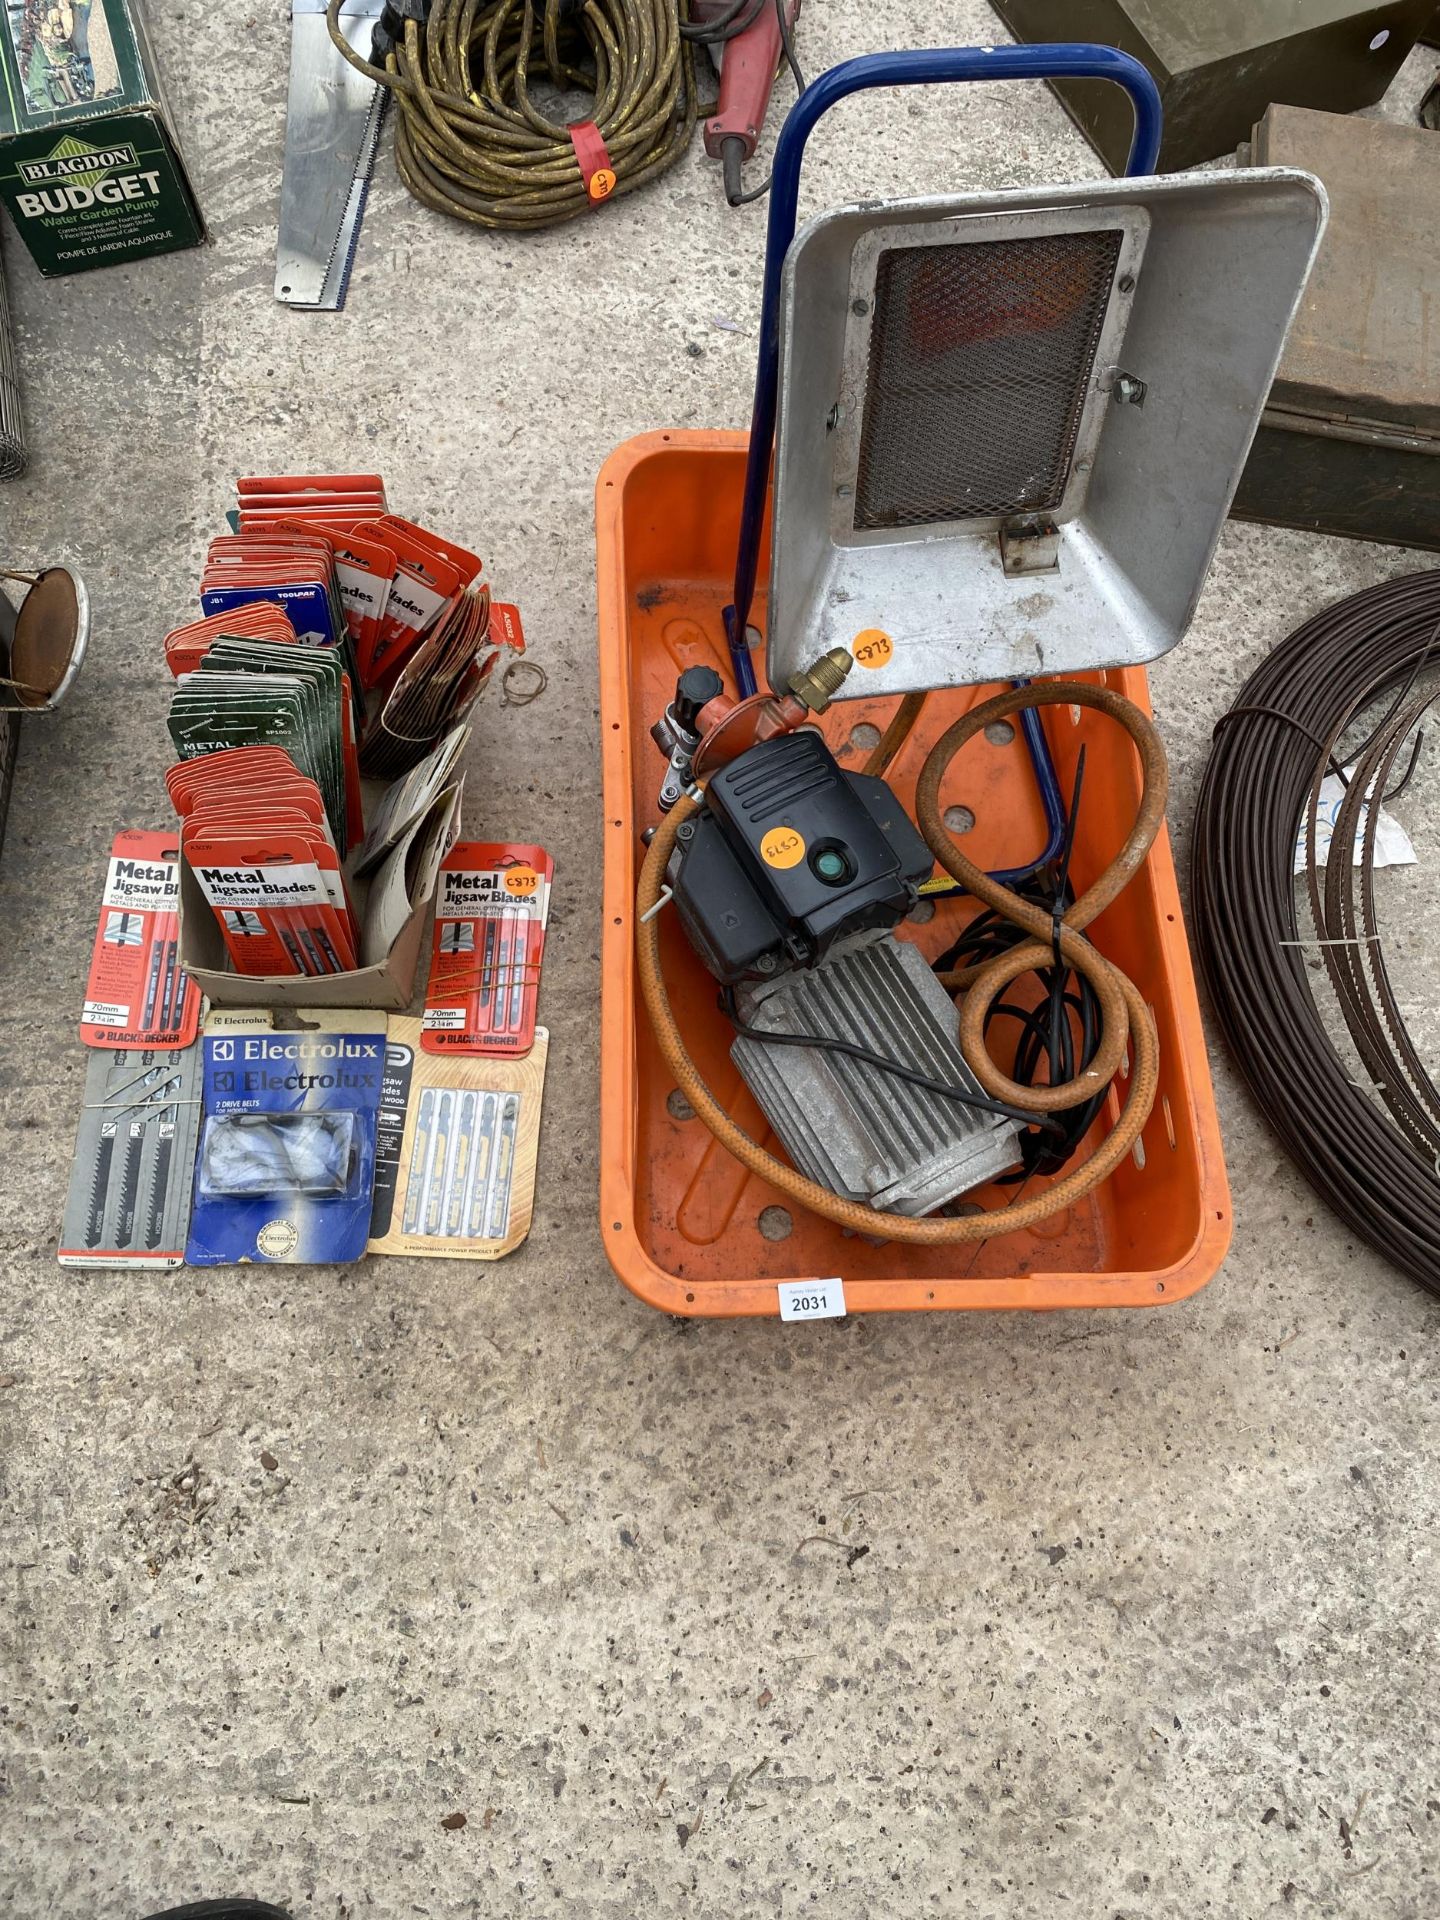 AN ASSORTMENT OF TOOLS AND HARDWARE TO INCLUDE JIGSAW BLADES, A PUMP AND A GAS HEATER ETC